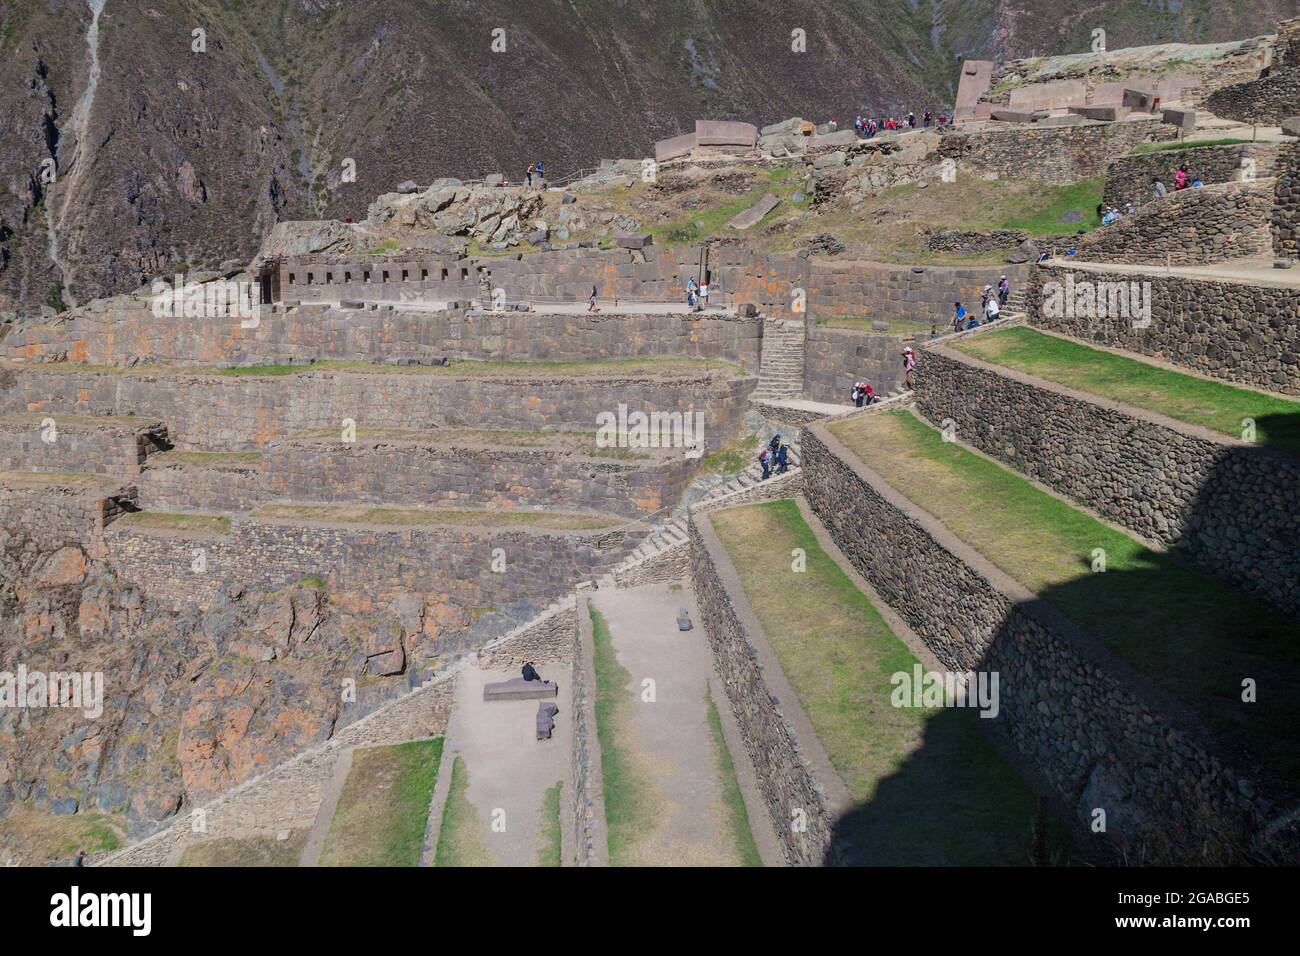 Agricultural terraces of Inca ruins of Ollantaytambo, Sacred Valley of Incas, Peru Stock Photo